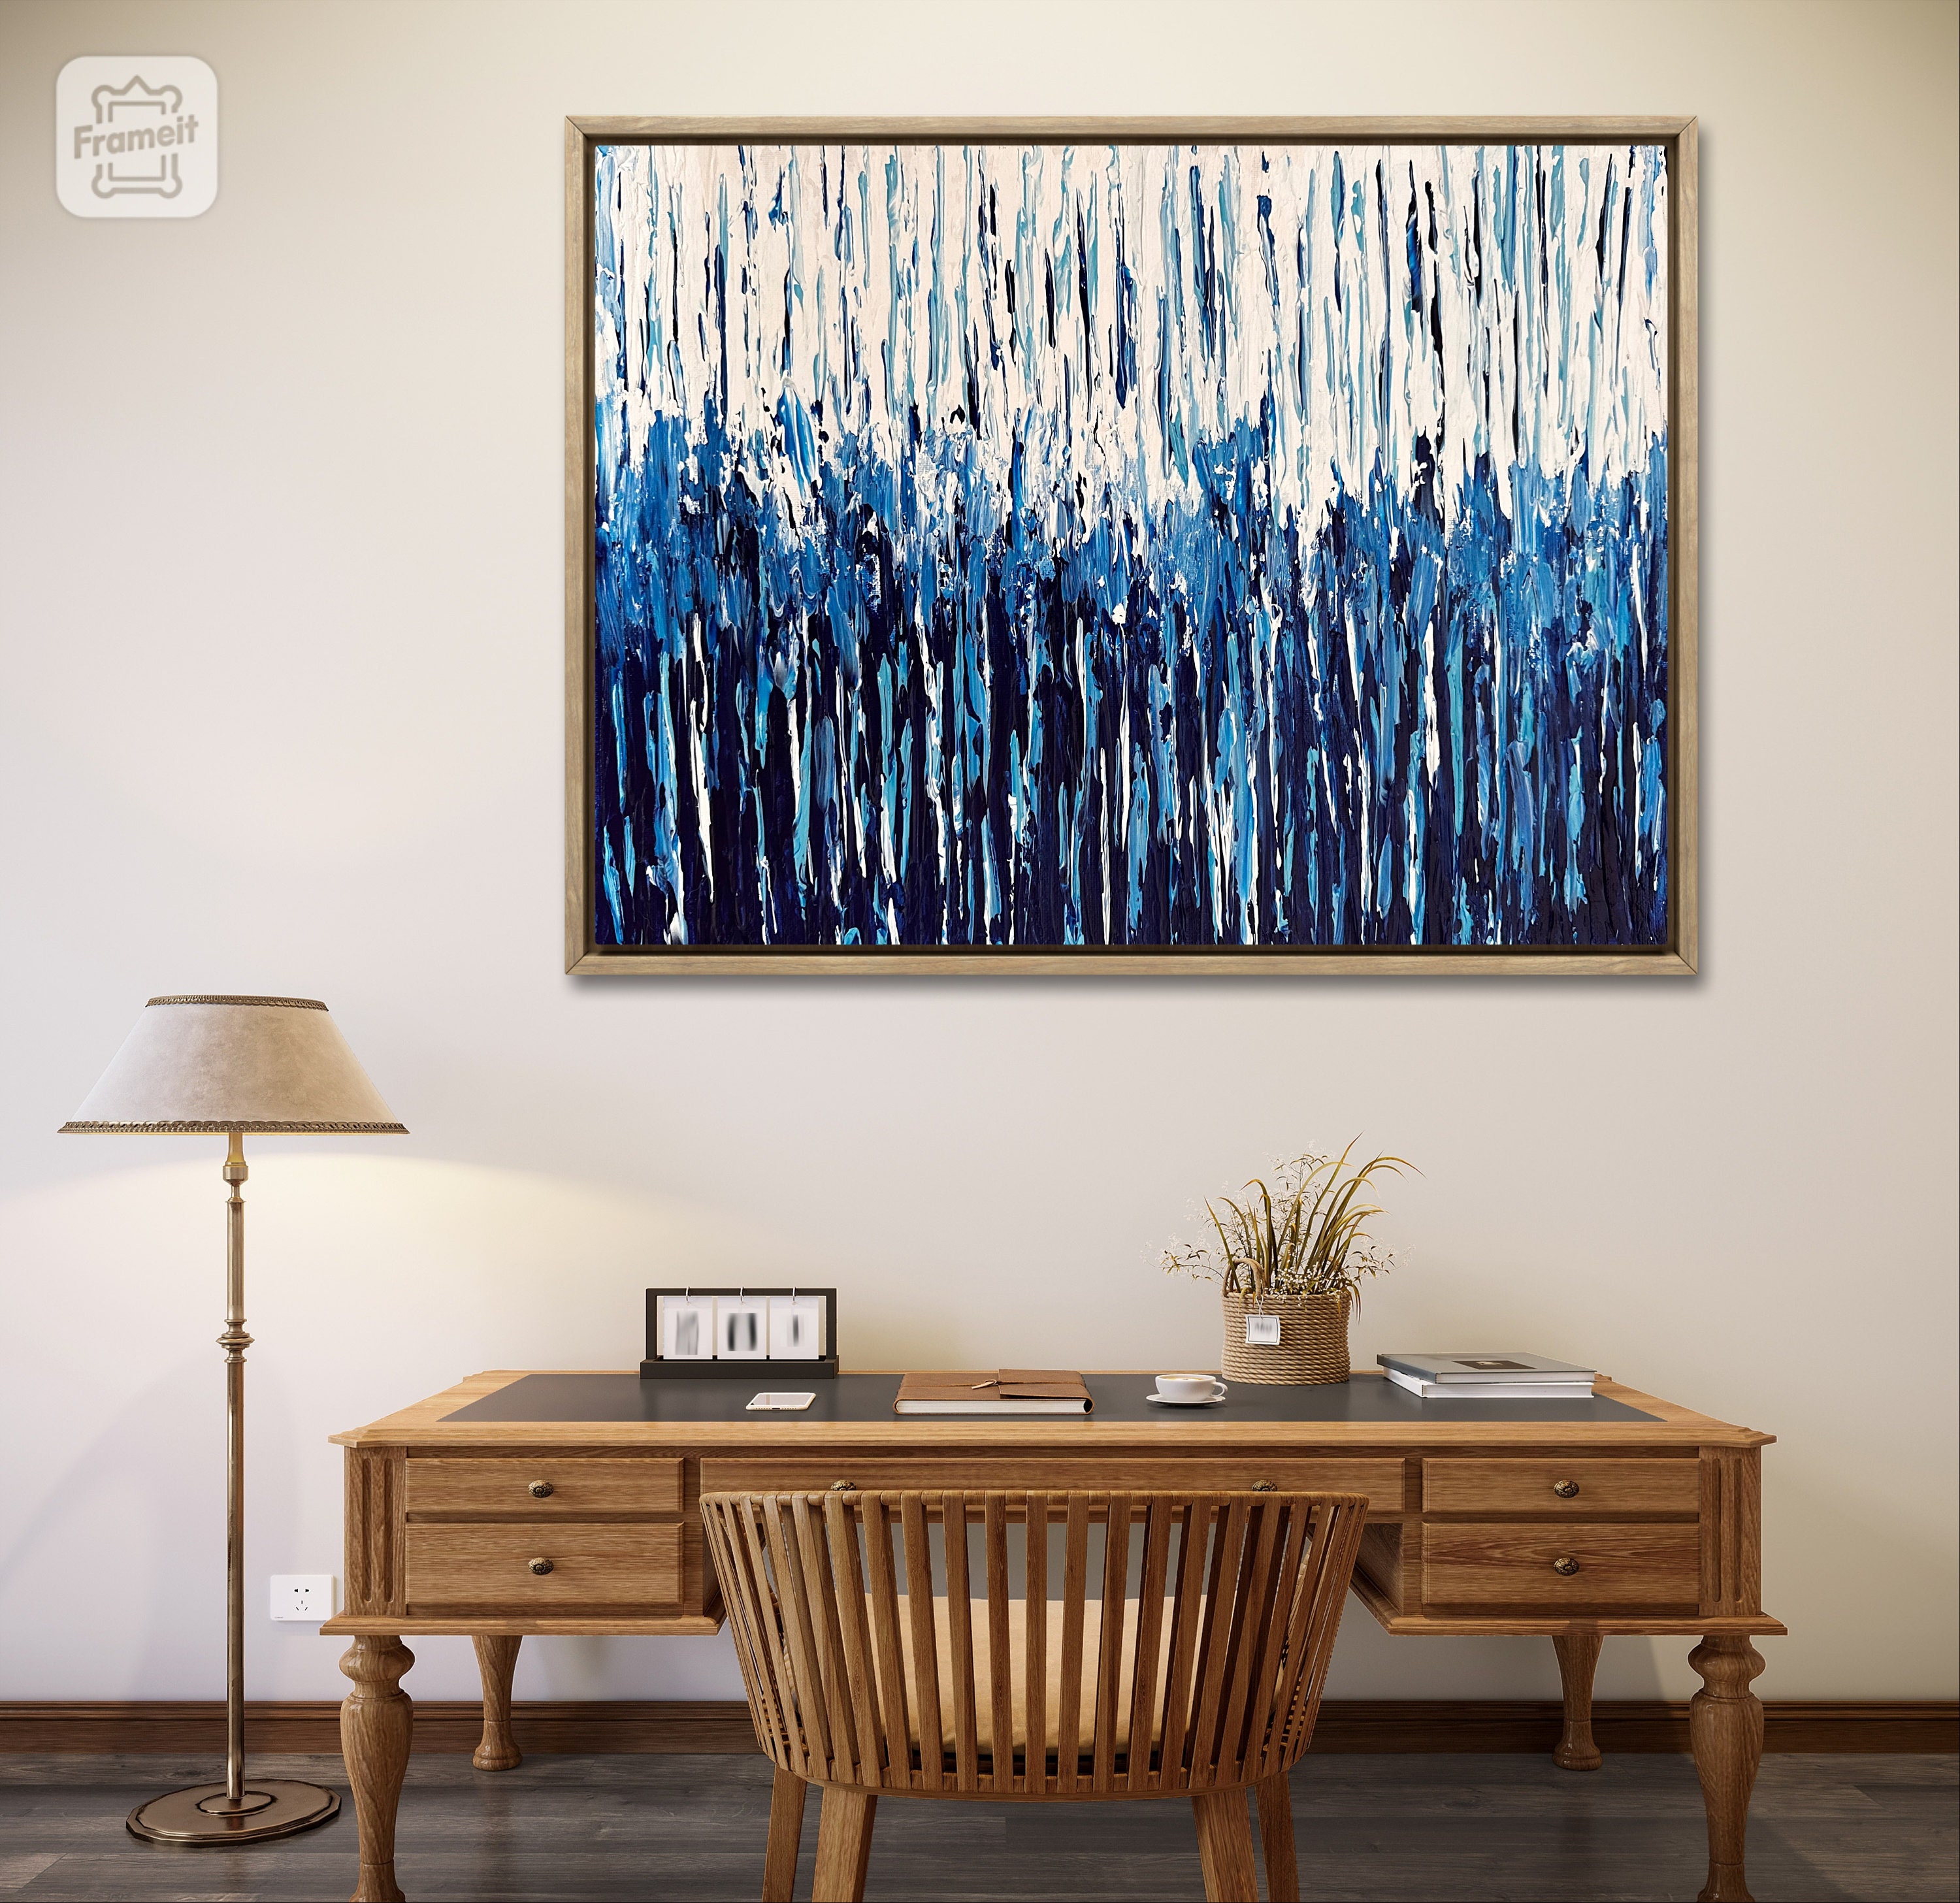 Buy Abstract Texture Painting for Living Room, Home Decor, Blue